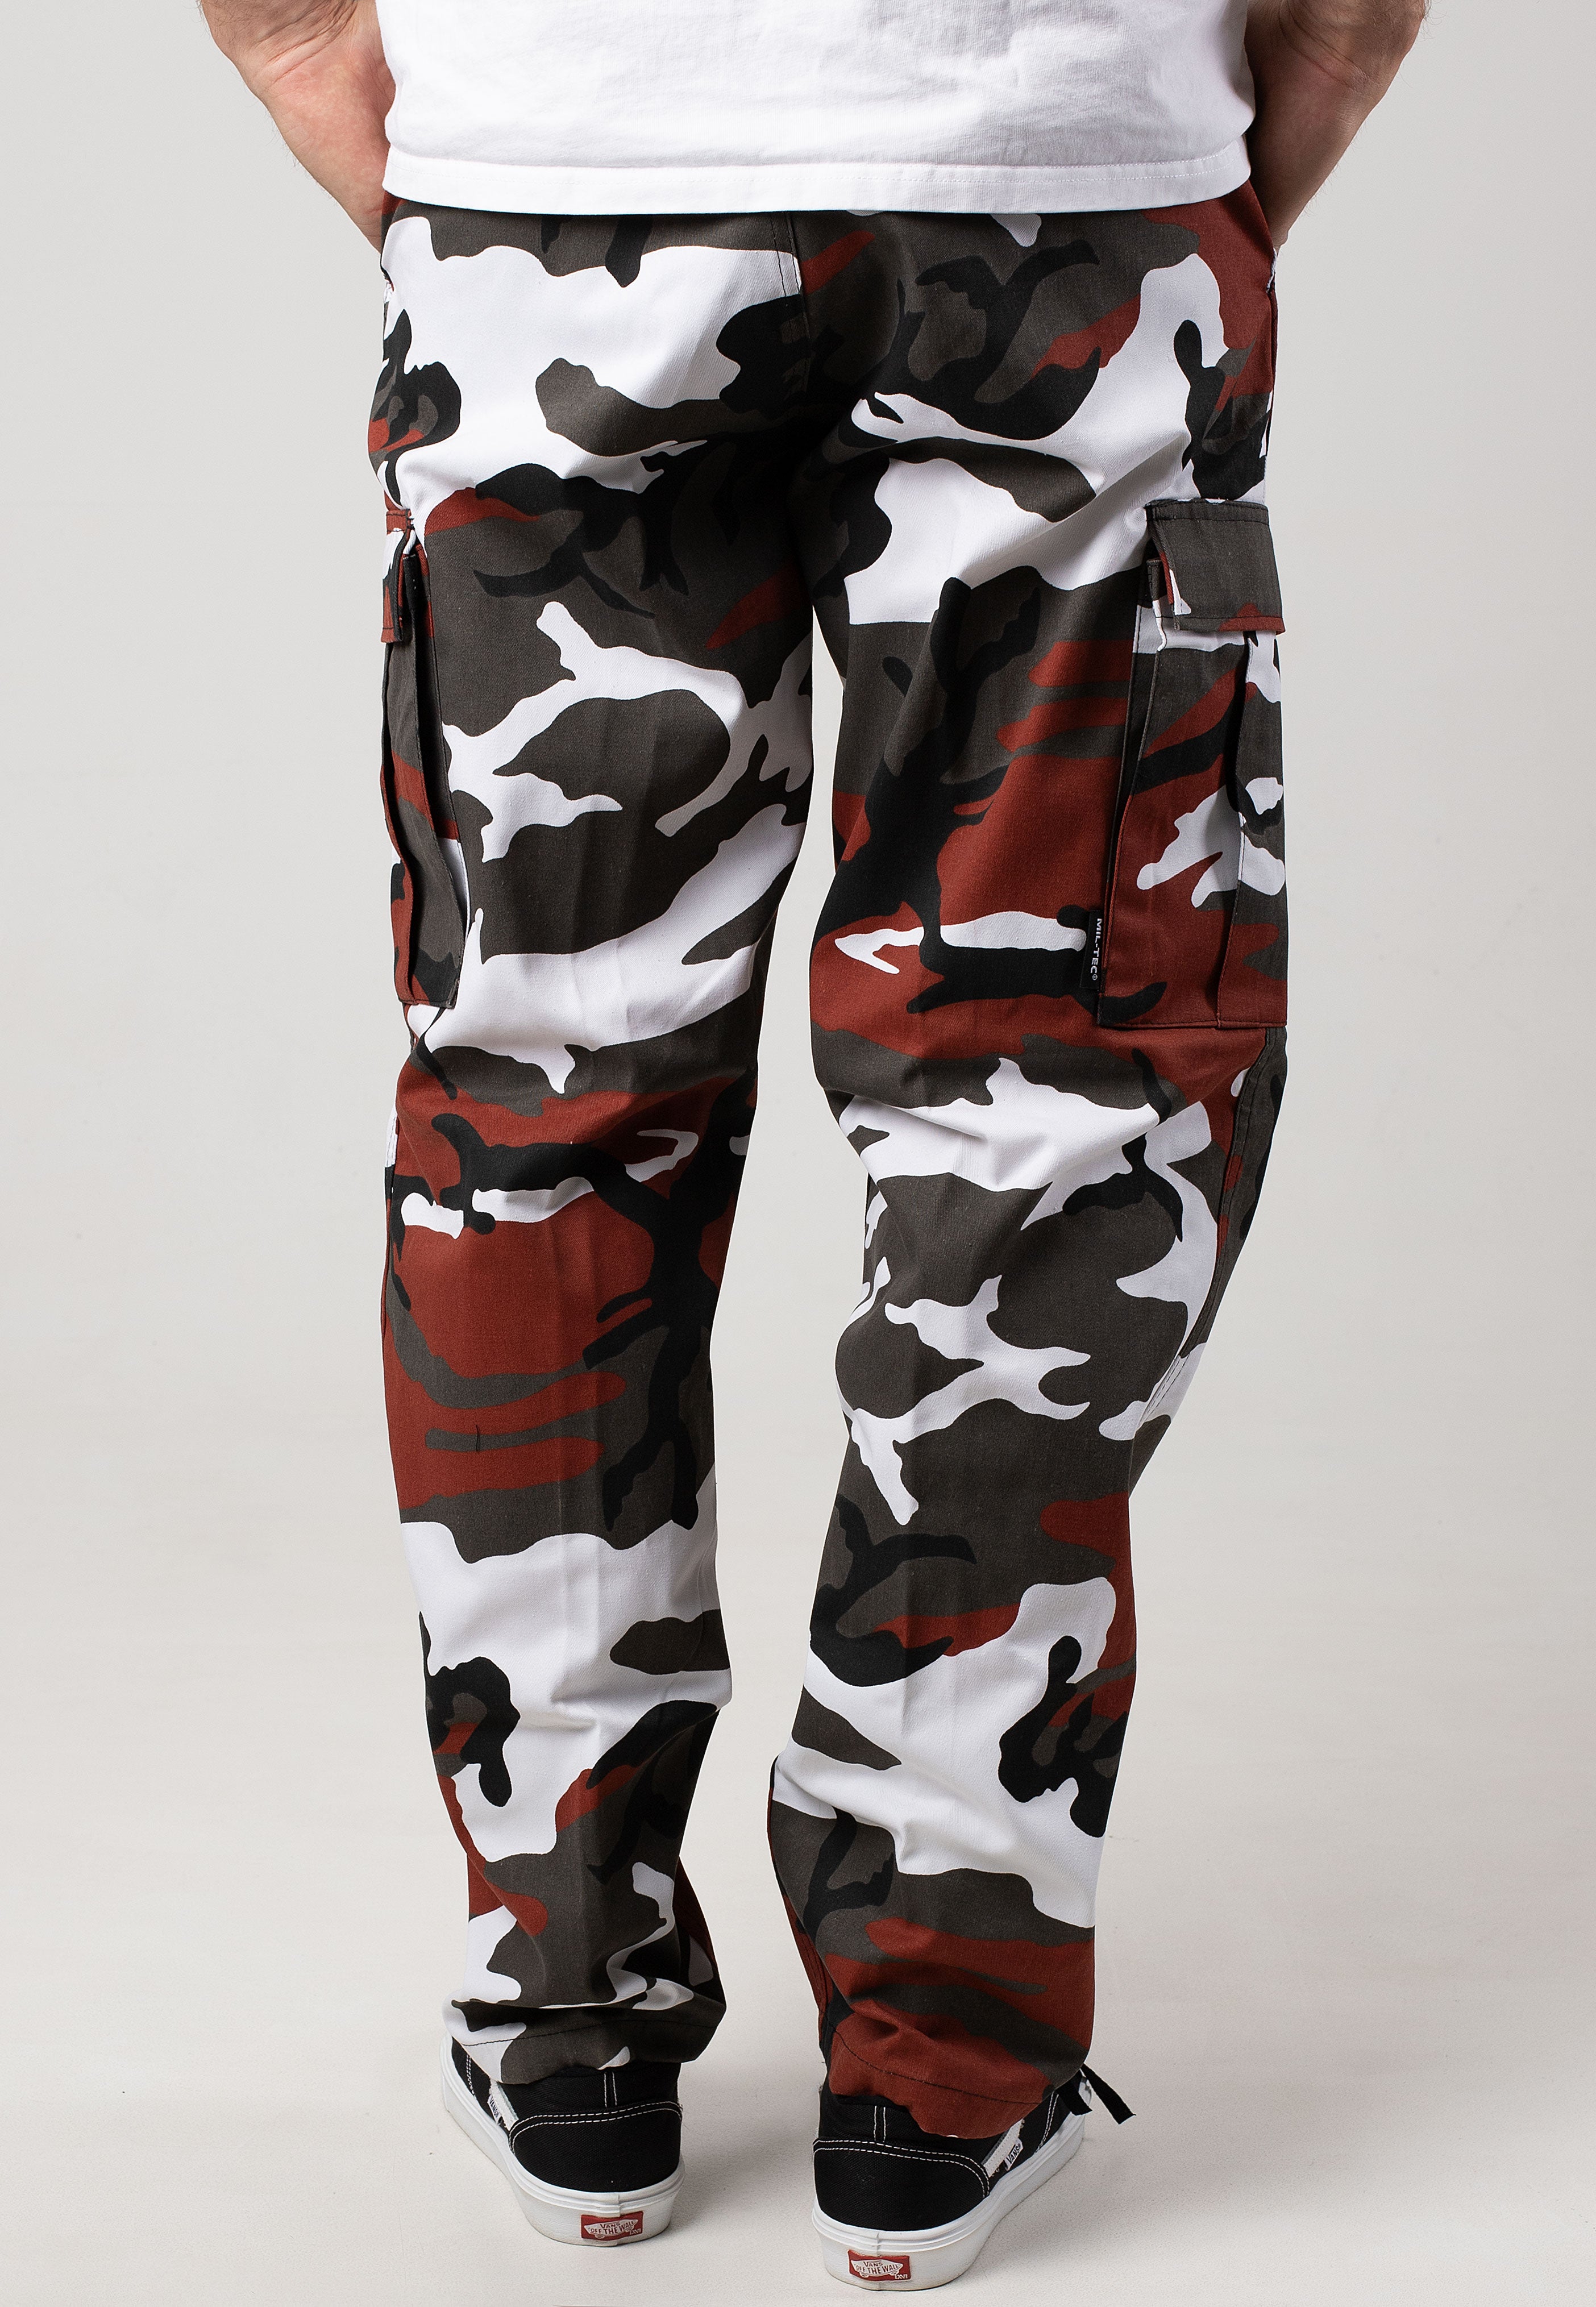 Mil-Tec - Ranger Red Camouflage - Pants